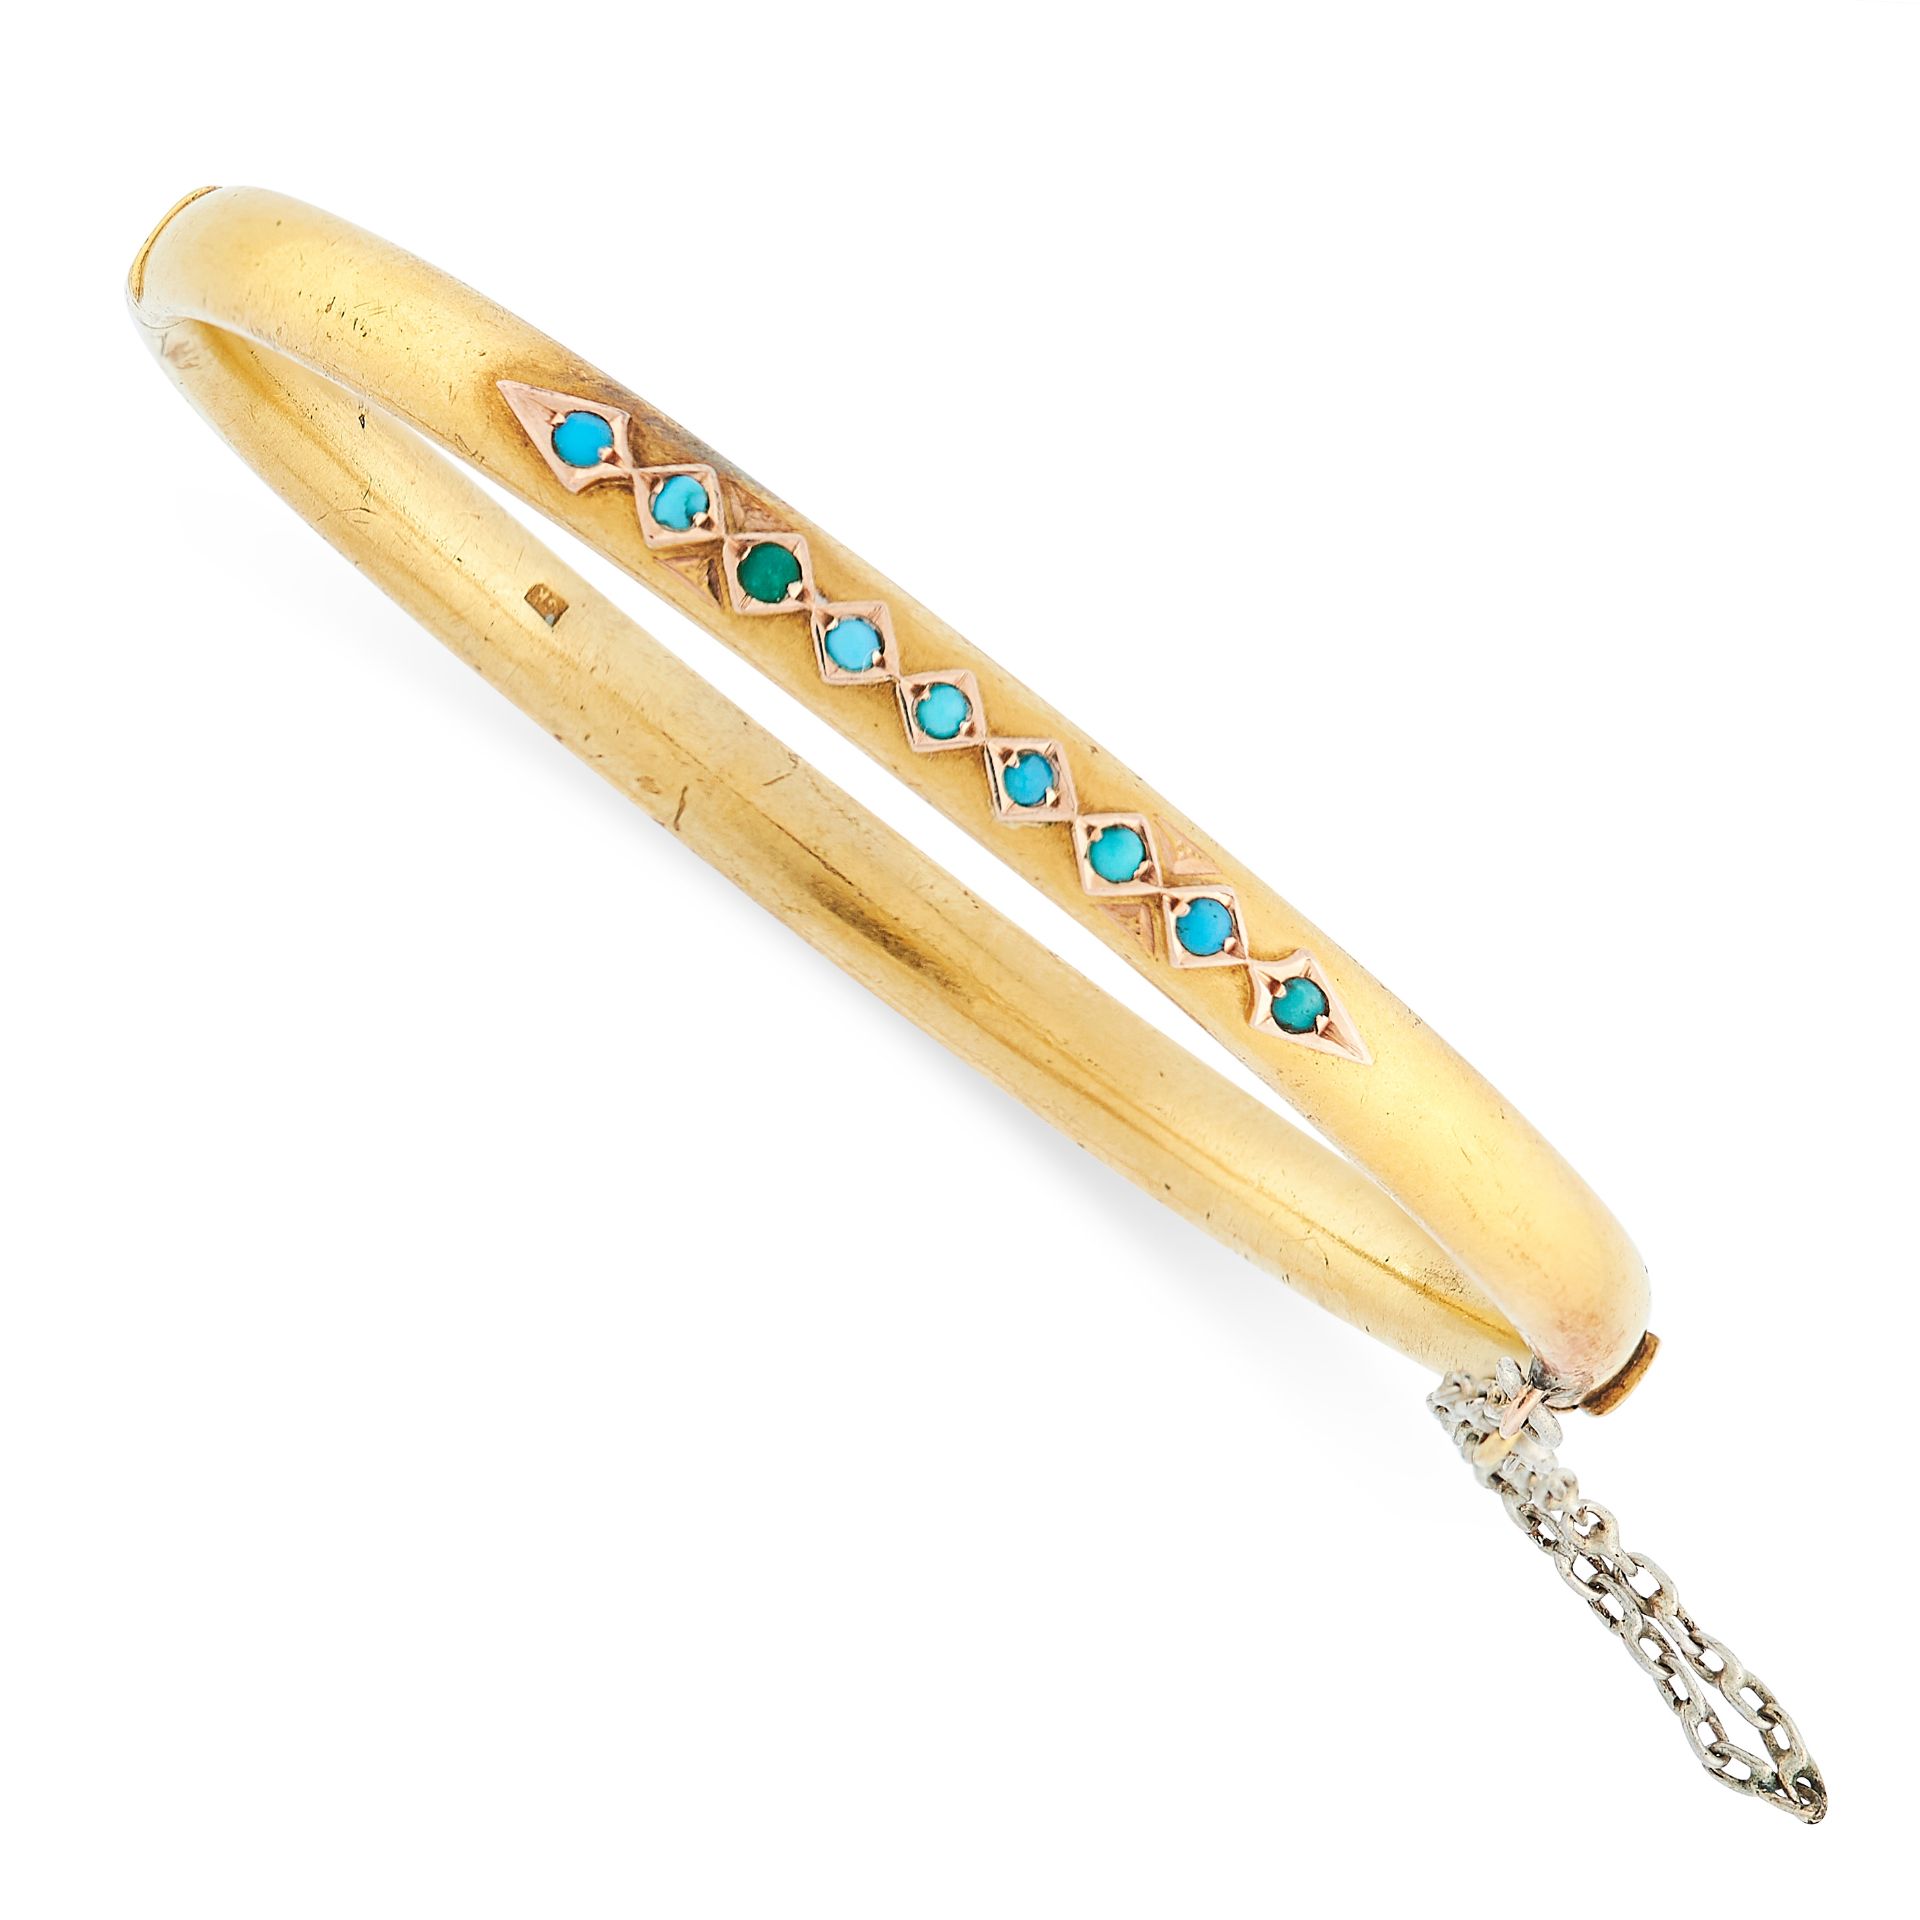 ANTIQUE TURQUOISE BANGLE, 19TH CENTURY in yellow gold, set with nine turquoise cabochons, SR maker’s